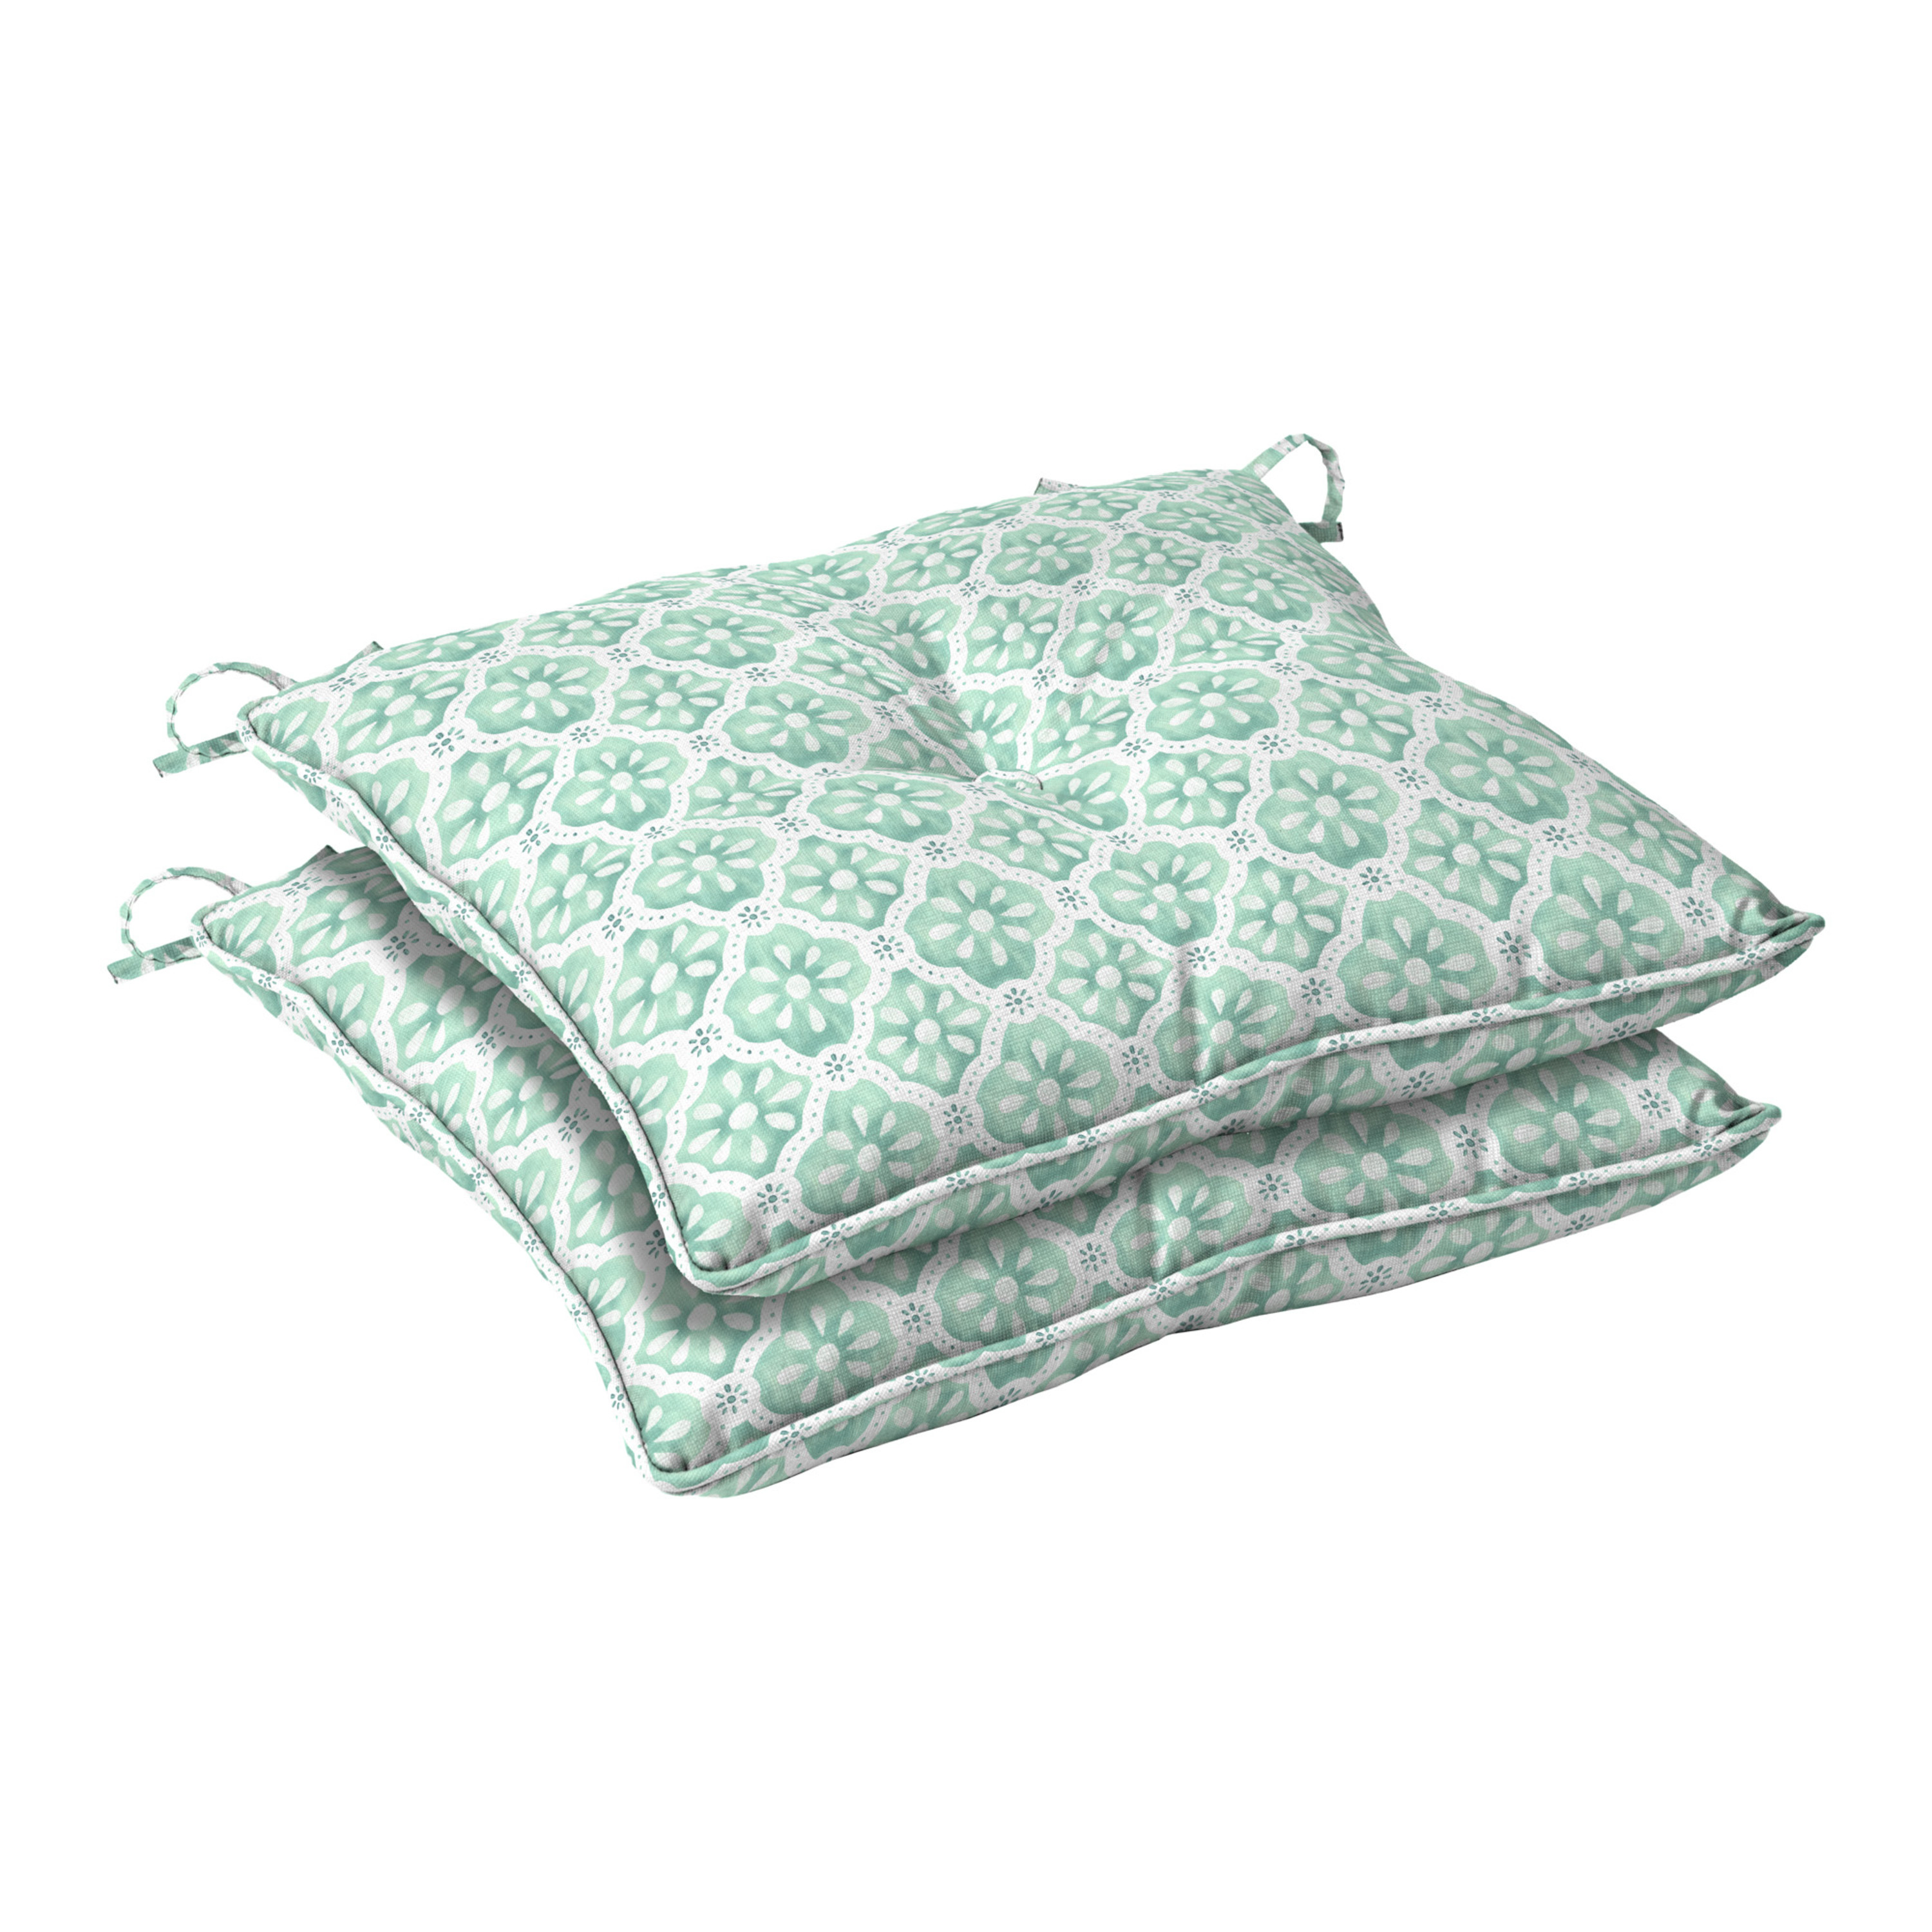 The Pioneer Woman 18" x 19" Green Washy Trellis Outdoor Seat Pad, 2 Pack - image 1 of 10